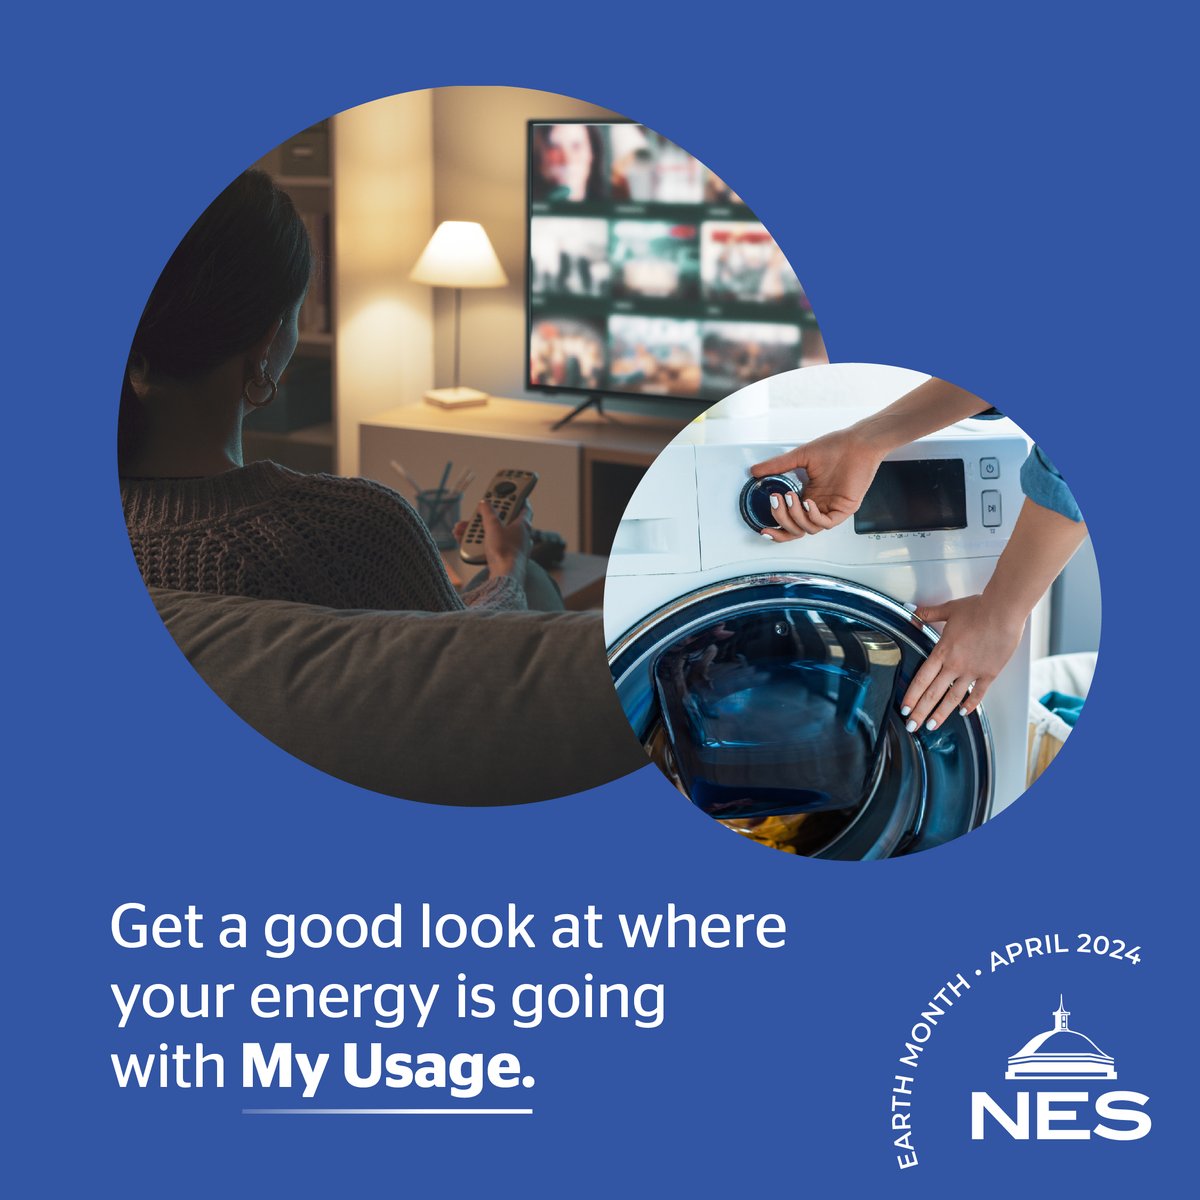 Take control of your energy usage with a new feature coming soon to the NES website. My Usage will allow you to get customized energy tips, see how your energy usage compares to your neighbor’s, and even identify which appliances may be due for an upgrade.